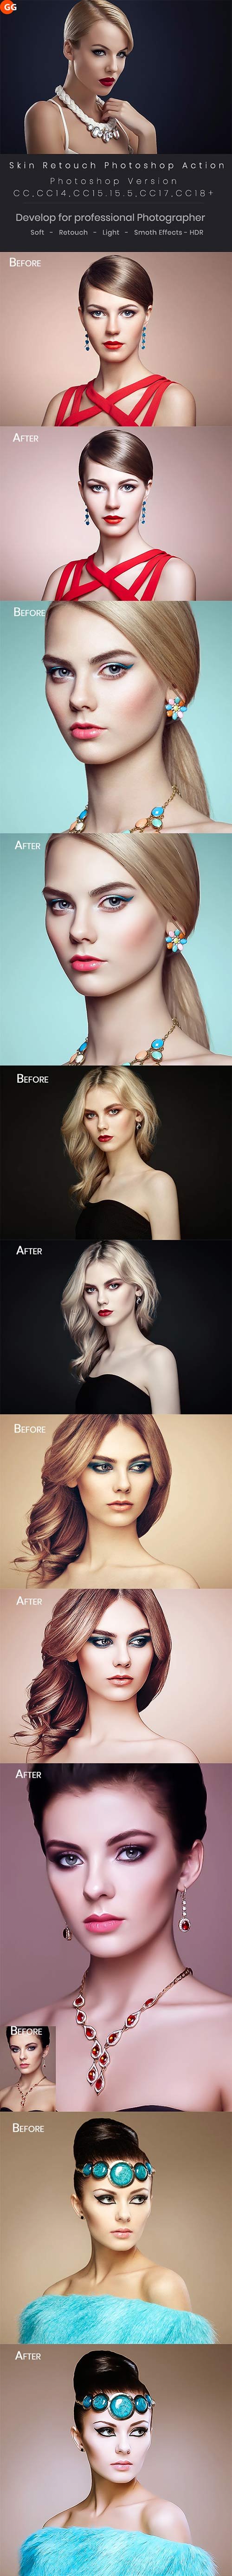 GraphicRiver - 10 Skin Retouch Photoshop Action 22290778